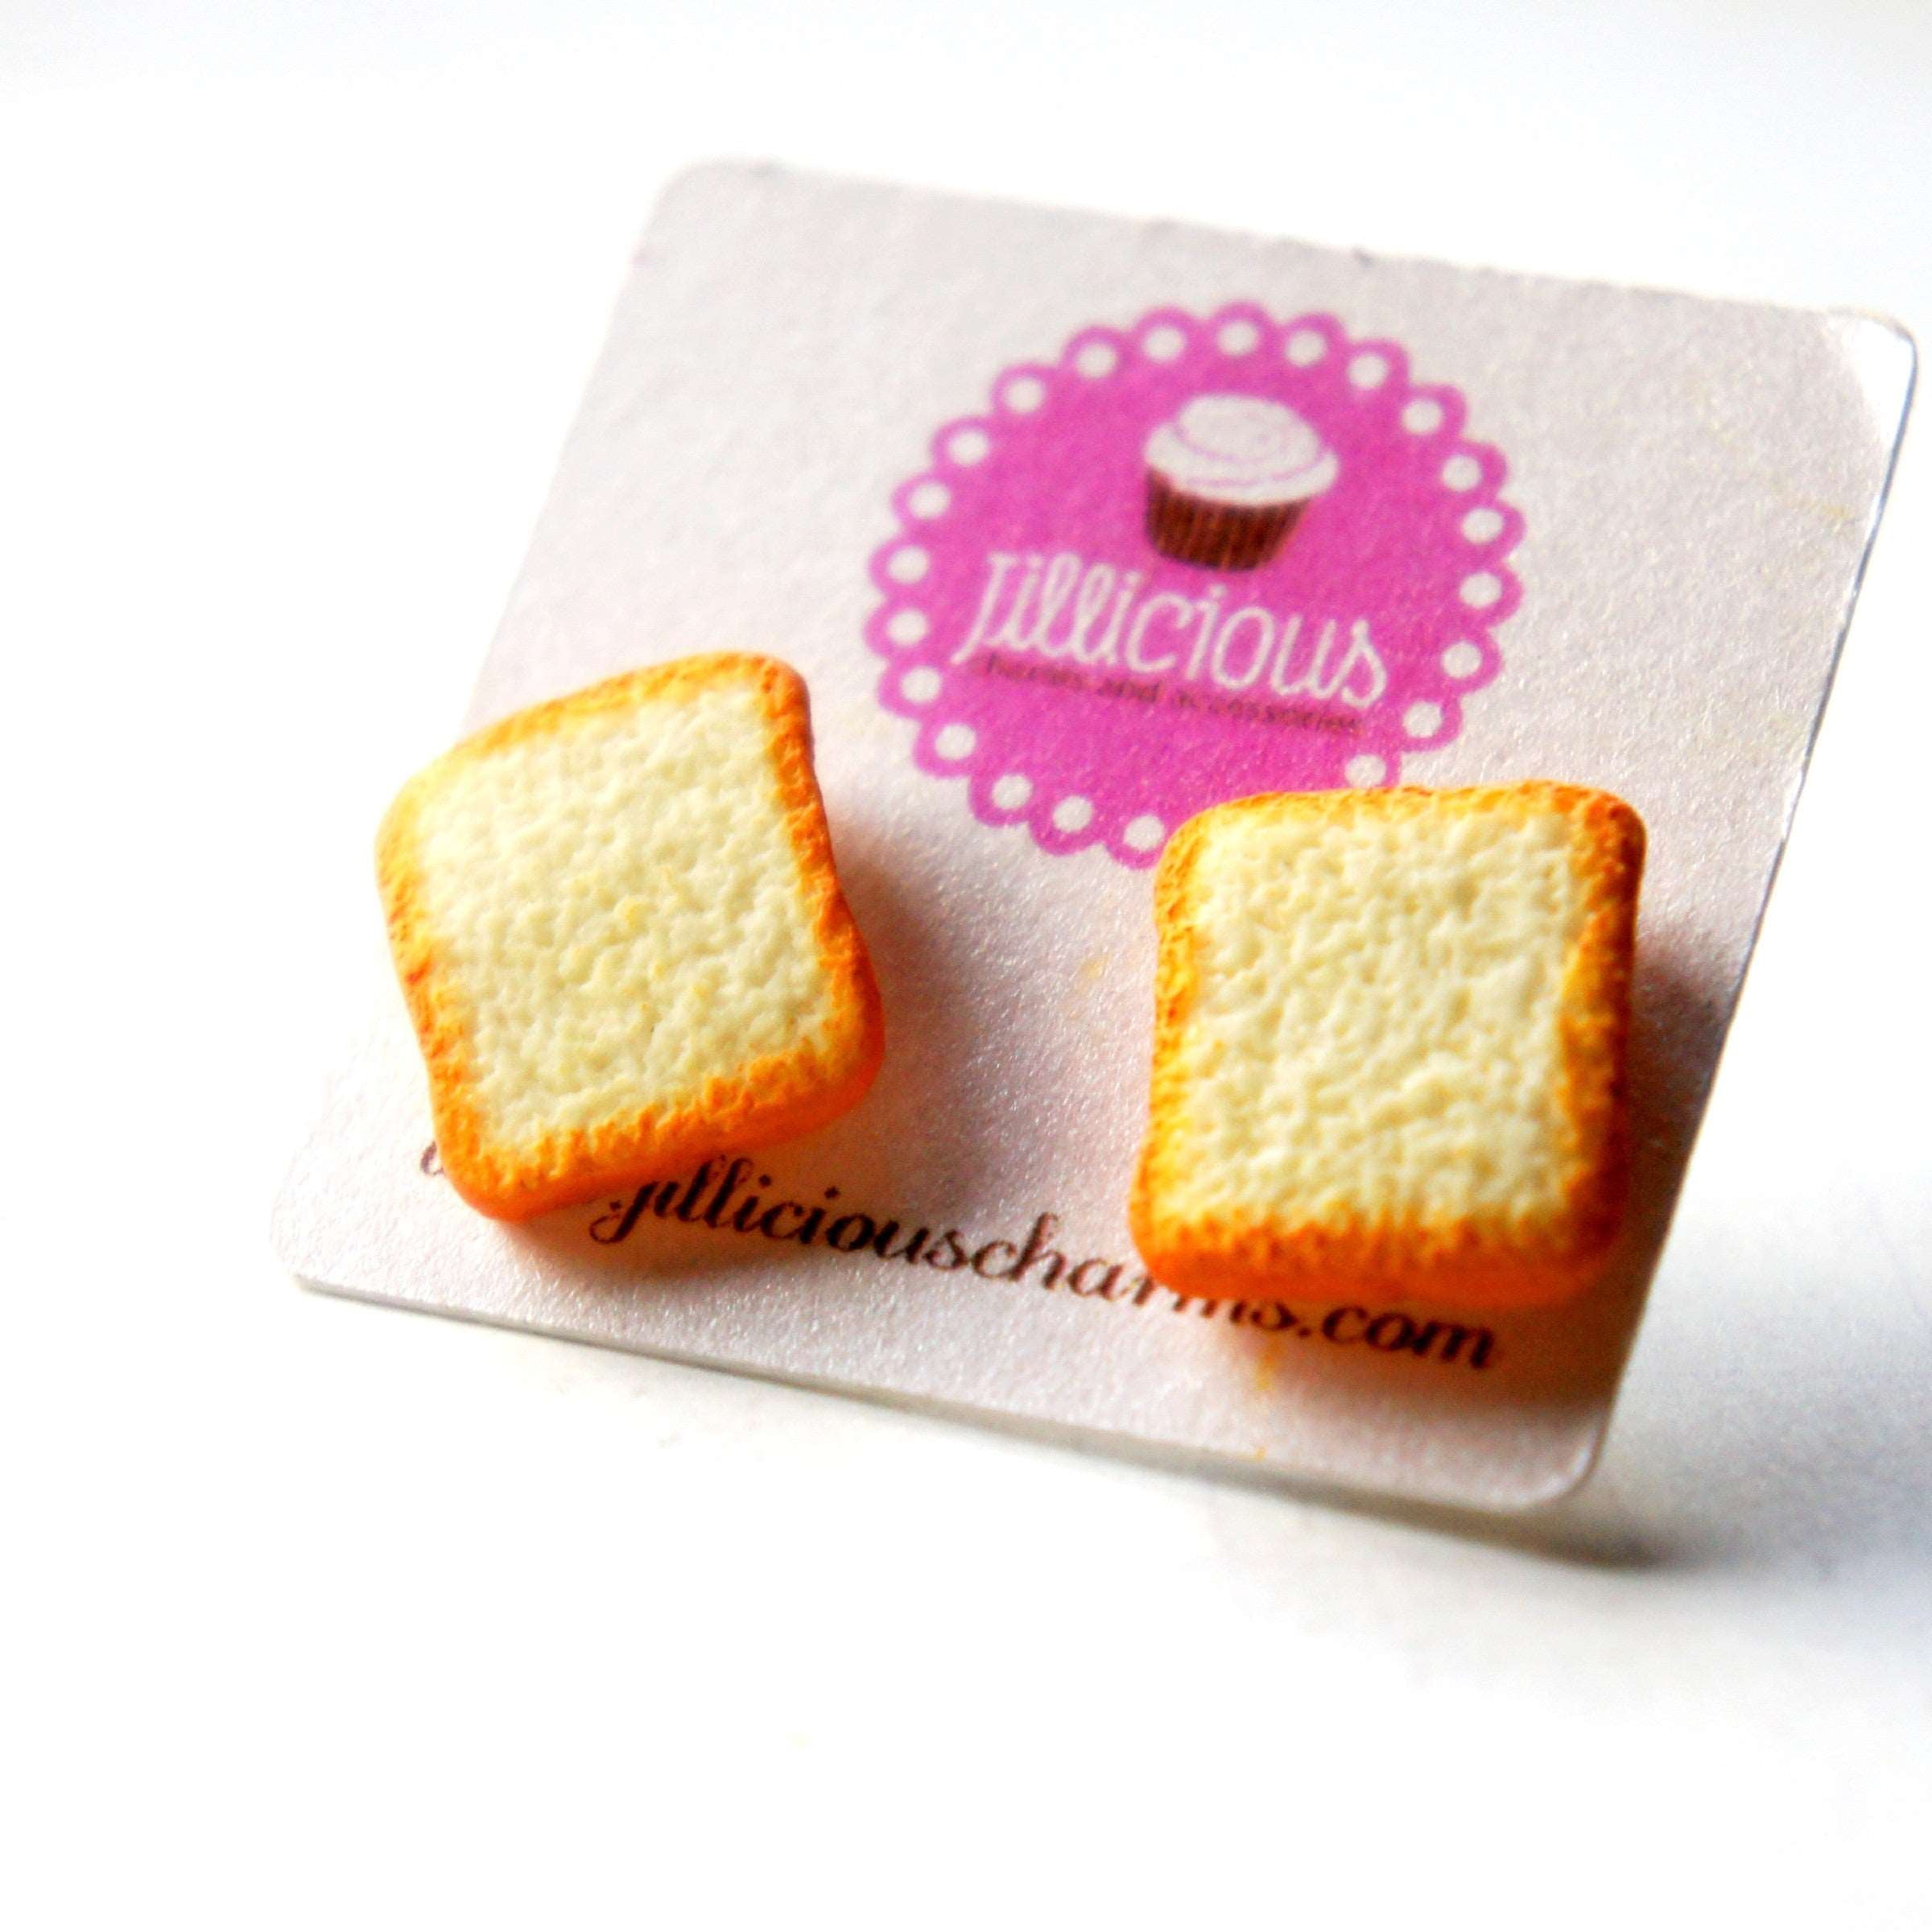 Bread Toast Stud Earrings - Jillicious charms and accessories